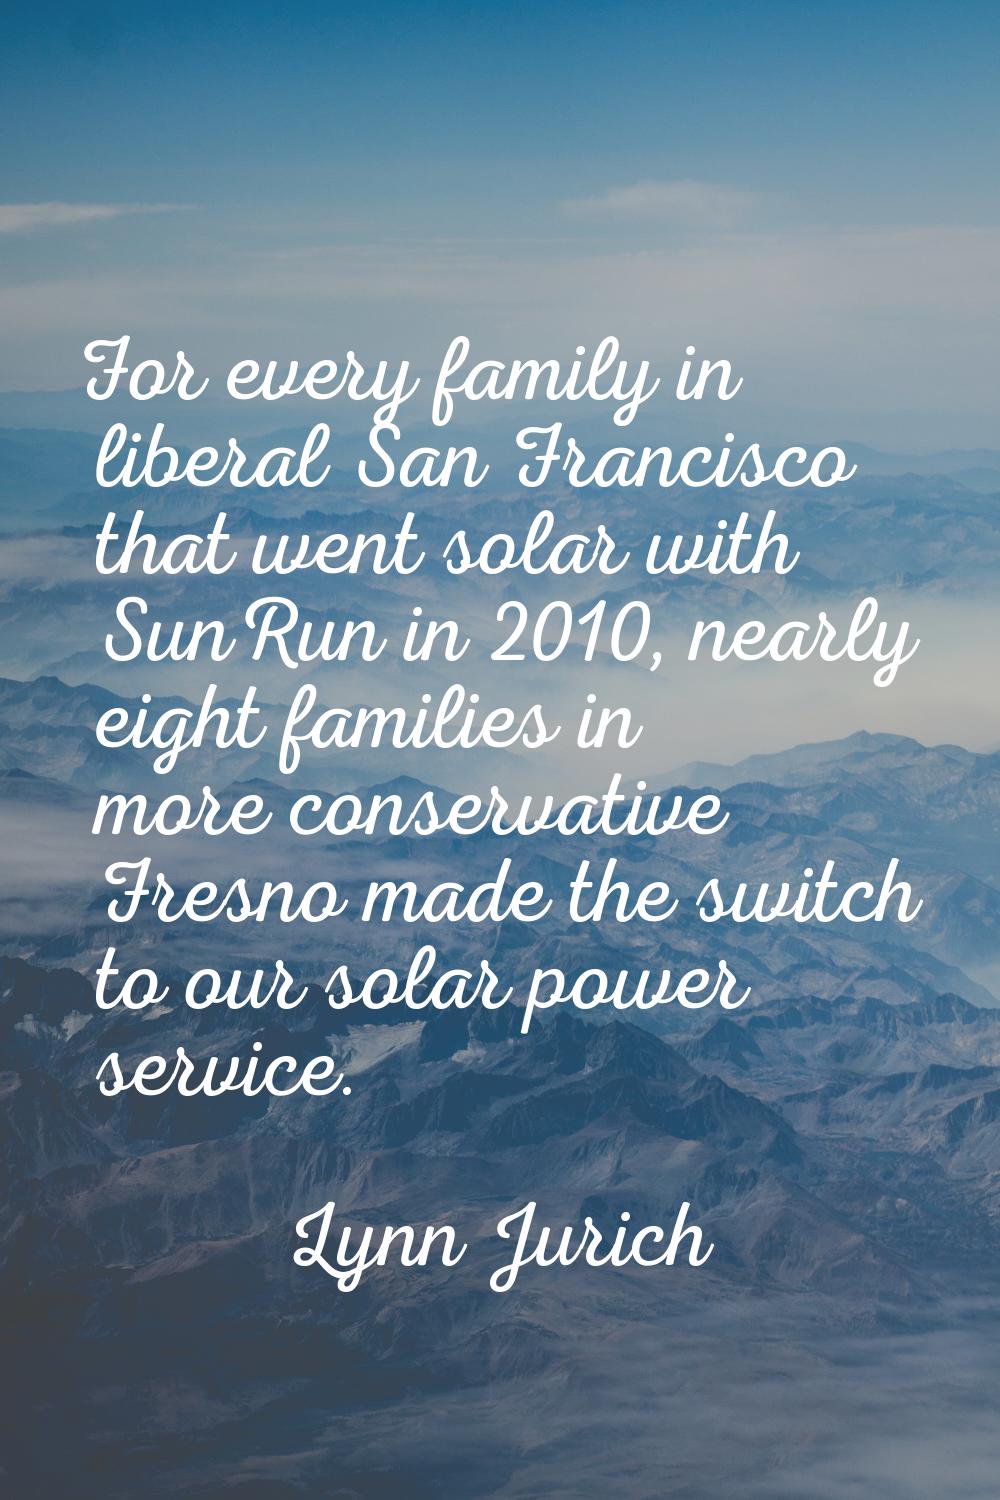 For every family in liberal San Francisco that went solar with SunRun in 2010, nearly eight familie